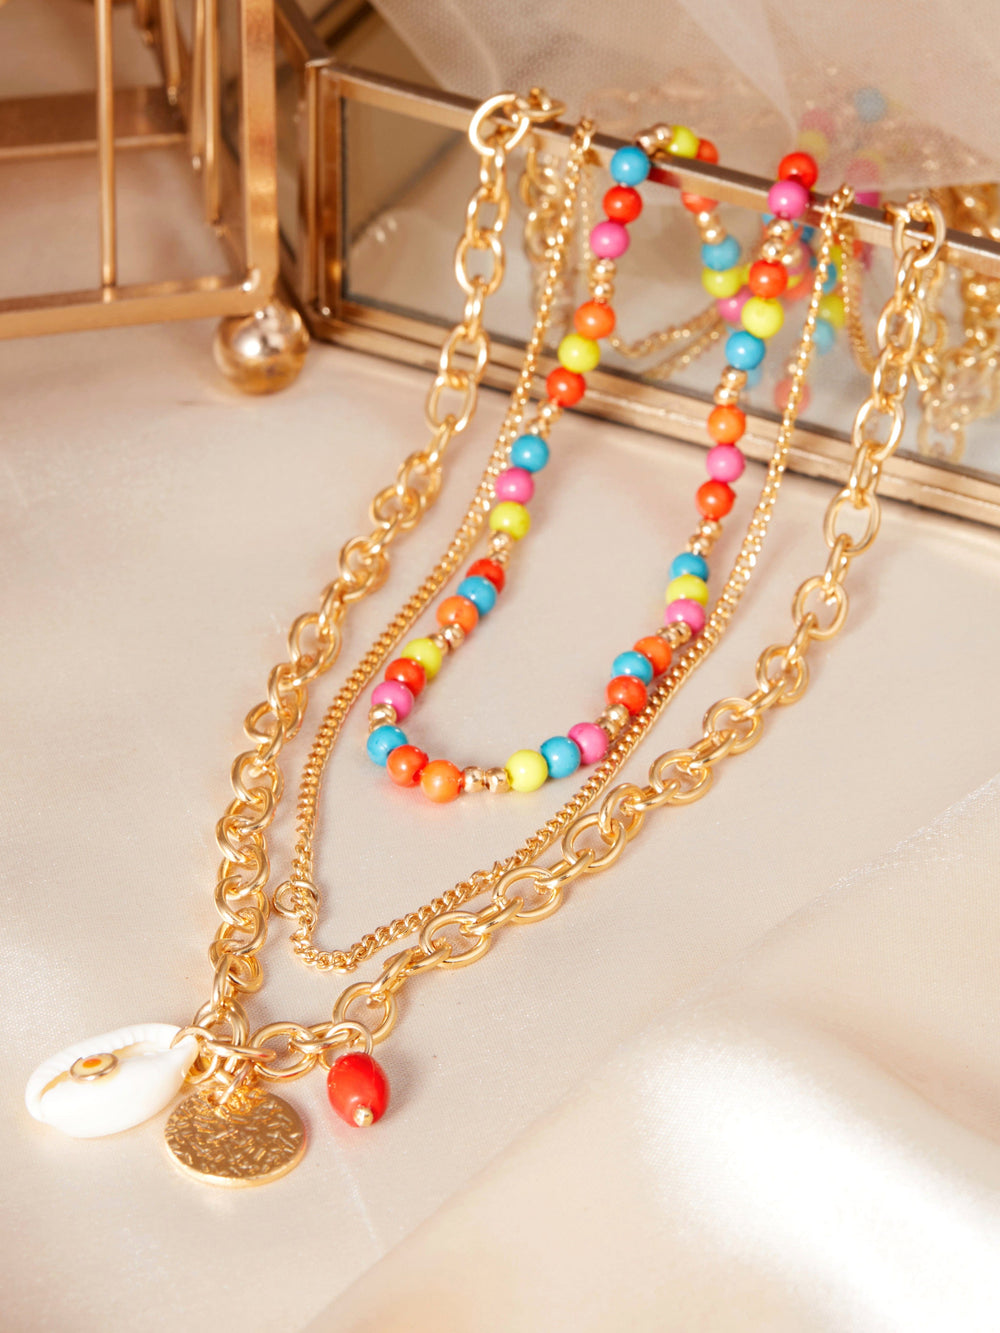 Rubans Voguish Gold-Toned Red Gold-Plated Handcrafted Necklace Chain & Necklaces